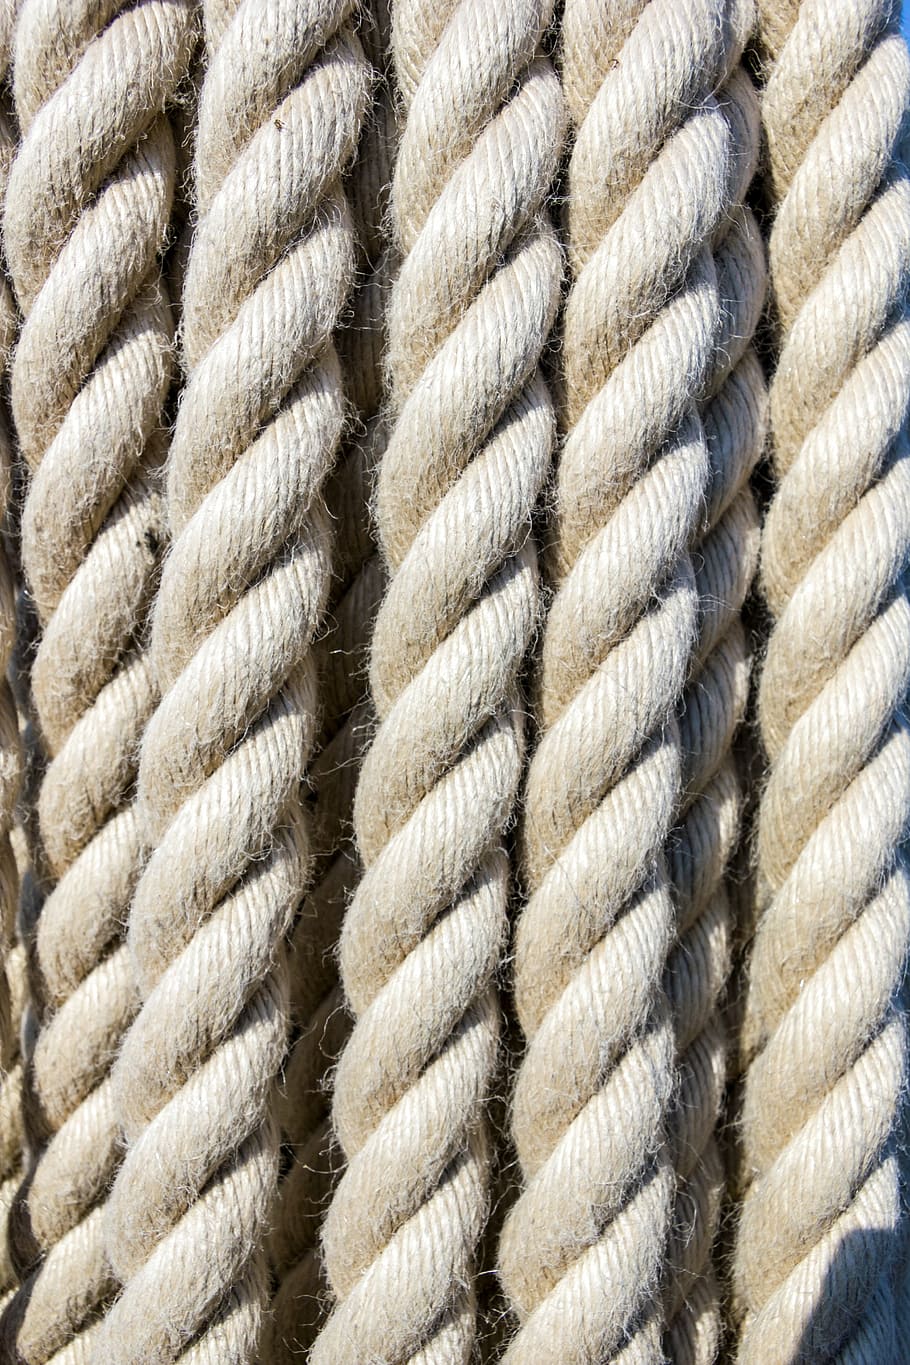 Strong rope 1080P, 2K, 4K, 5K HD wallpapers free download